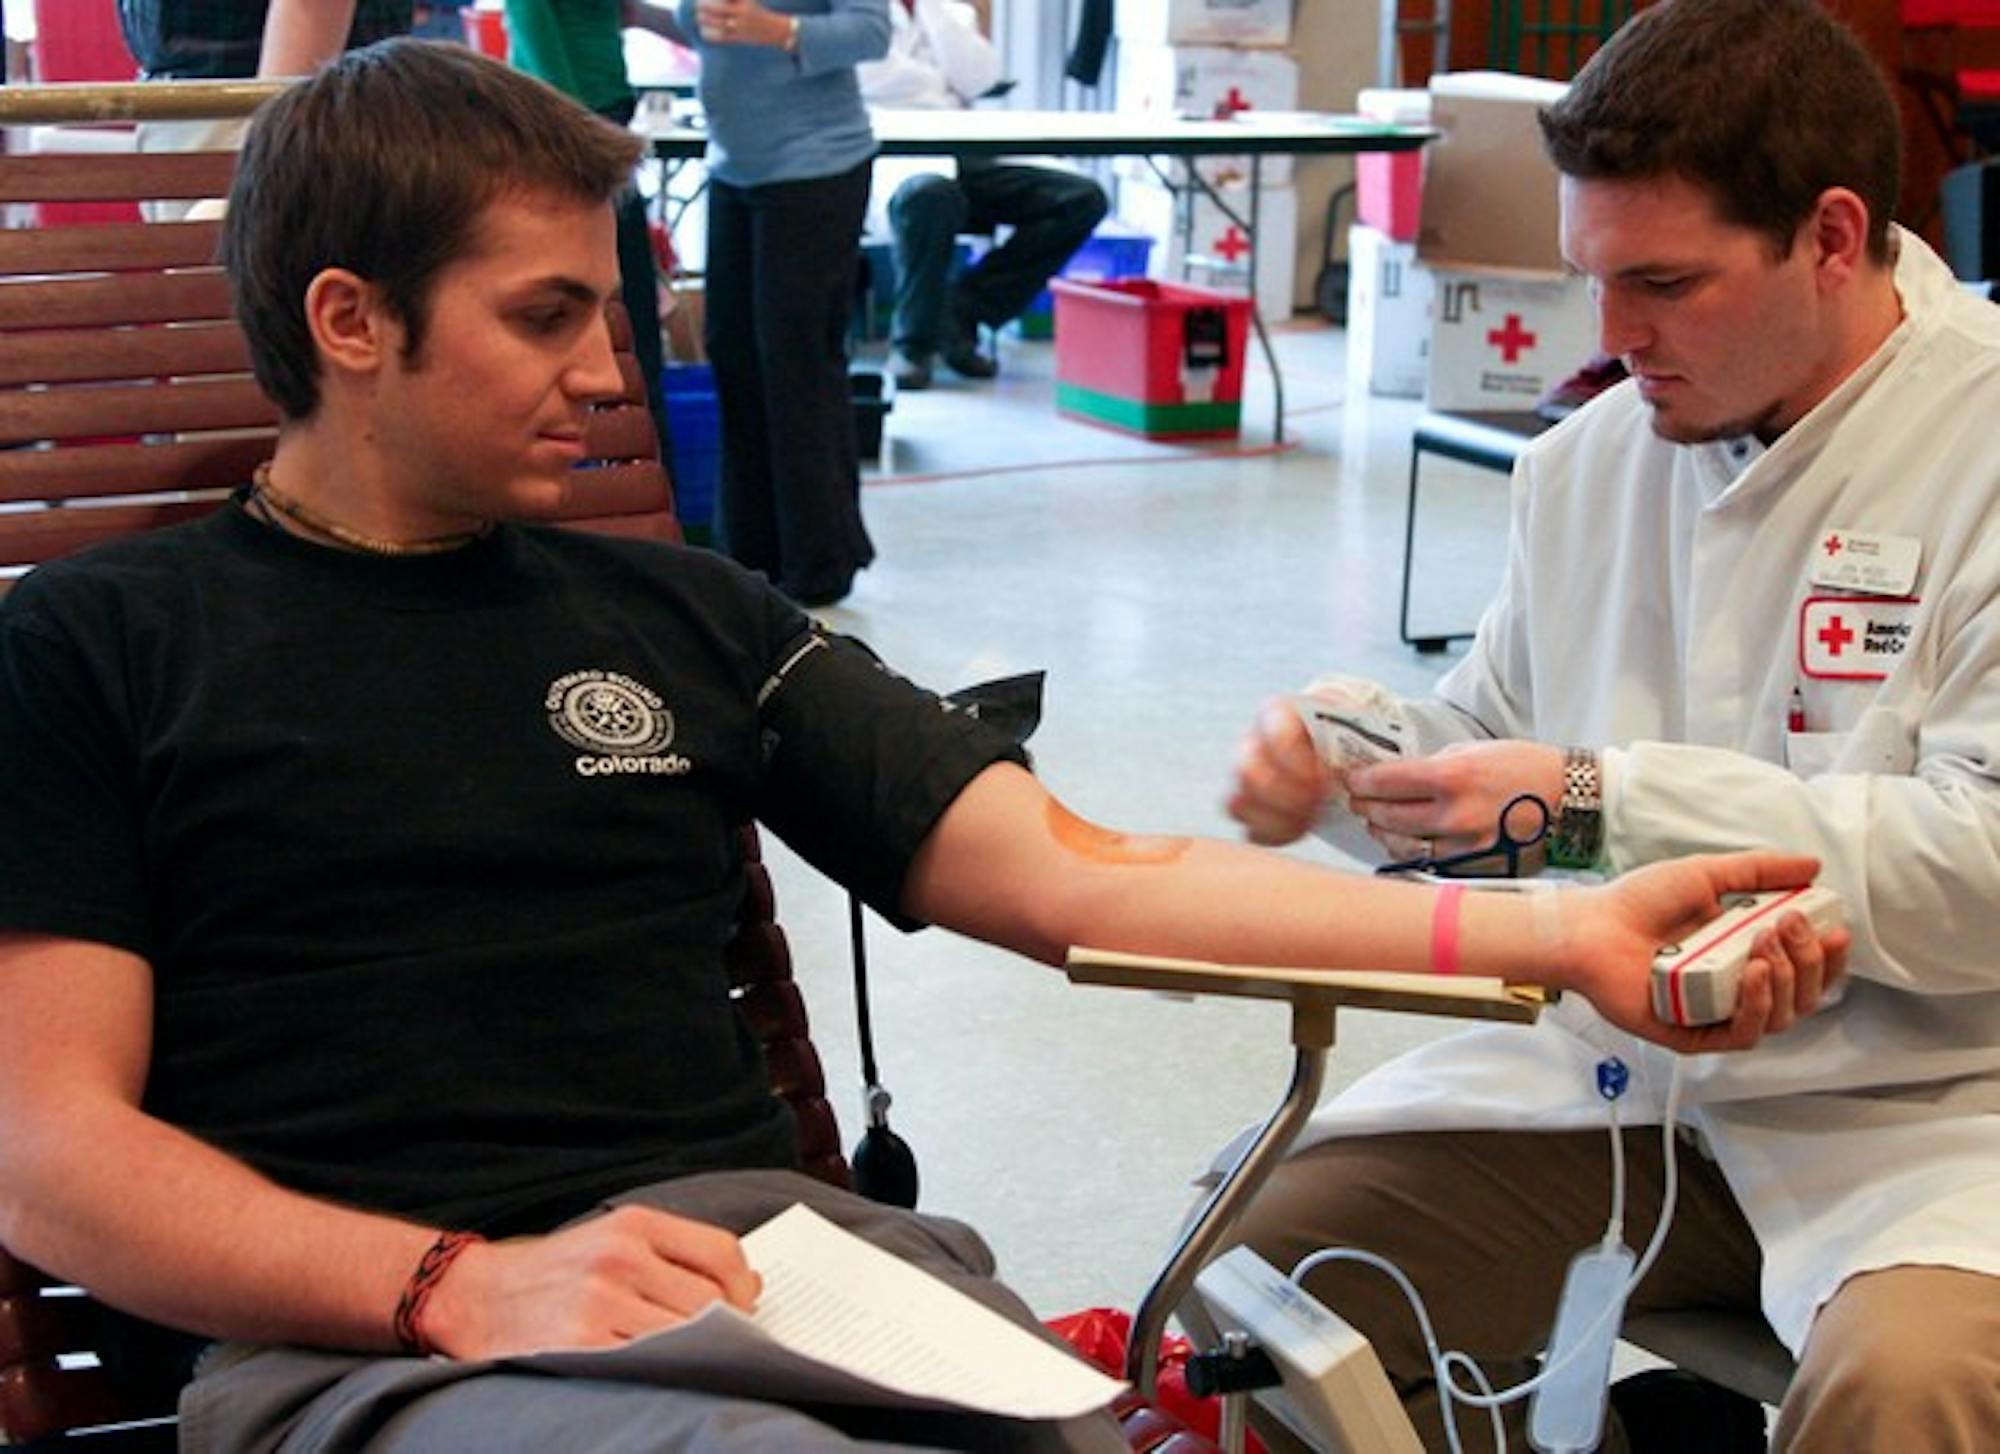 Nat Grainger '08 donates blood at the annual Blood Drive at The Hop on Wednesday.